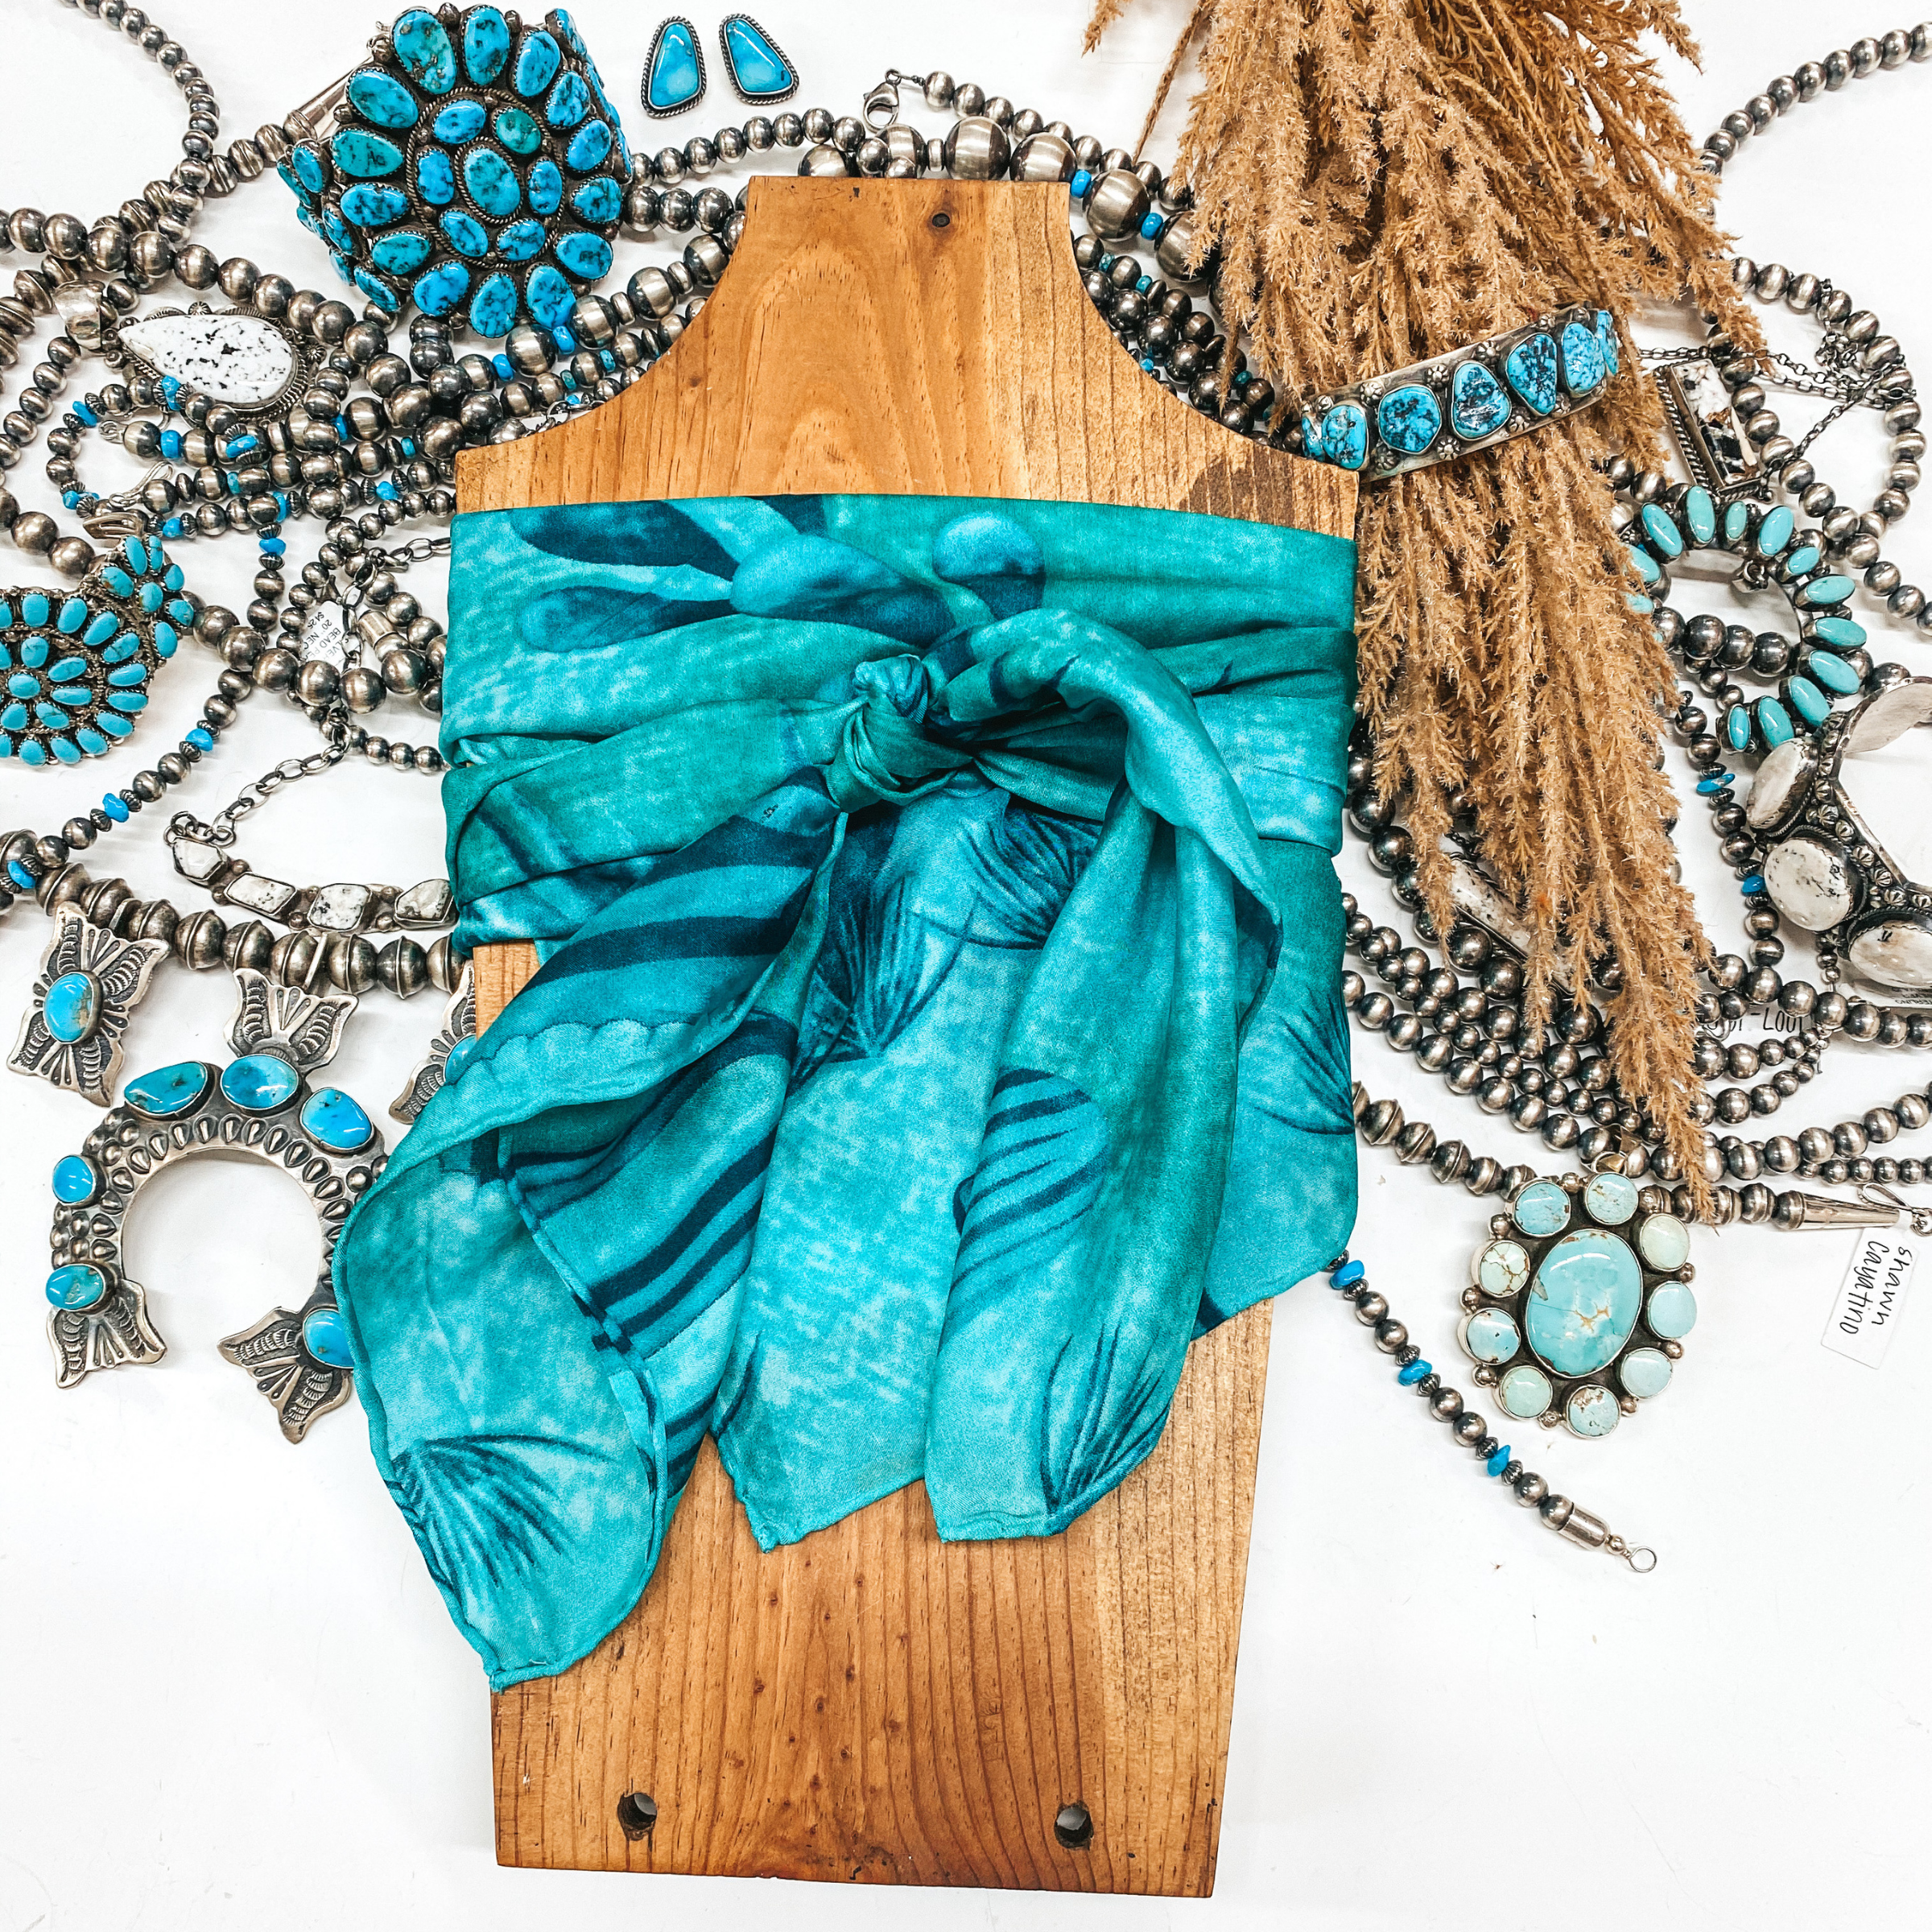 Southwest Cactus Wild Rag in Teal - Giddy Up Glamour Boutique